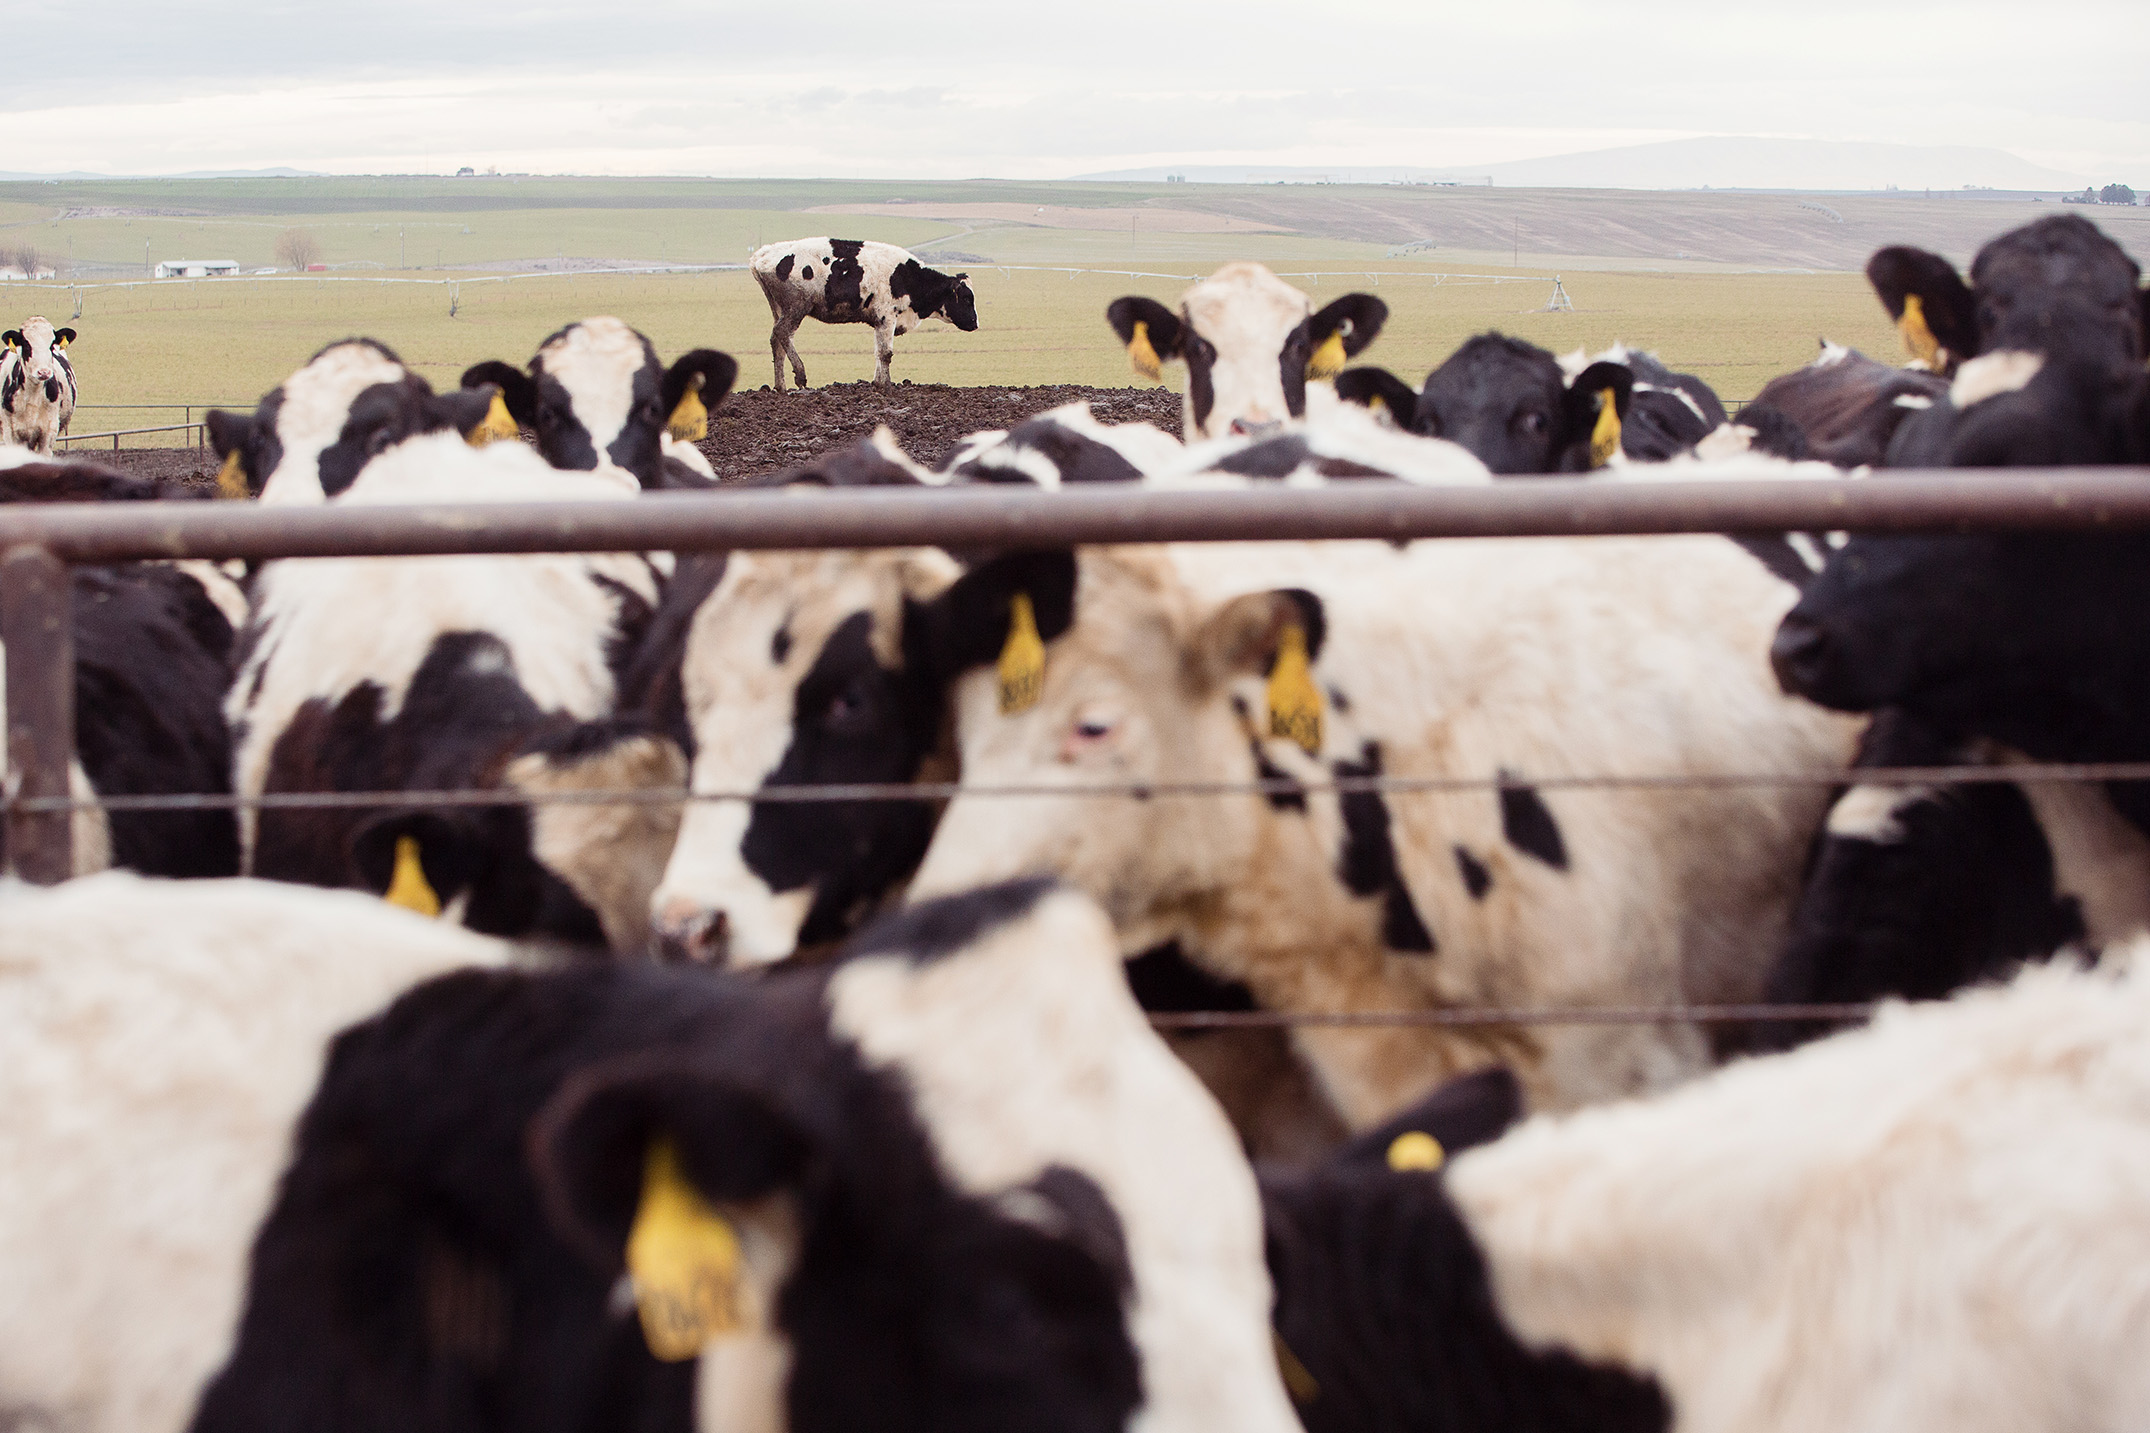 Mike Kane | Dairy cows in Eastern Washington | Seattle documentary, editorial, and commercial photography